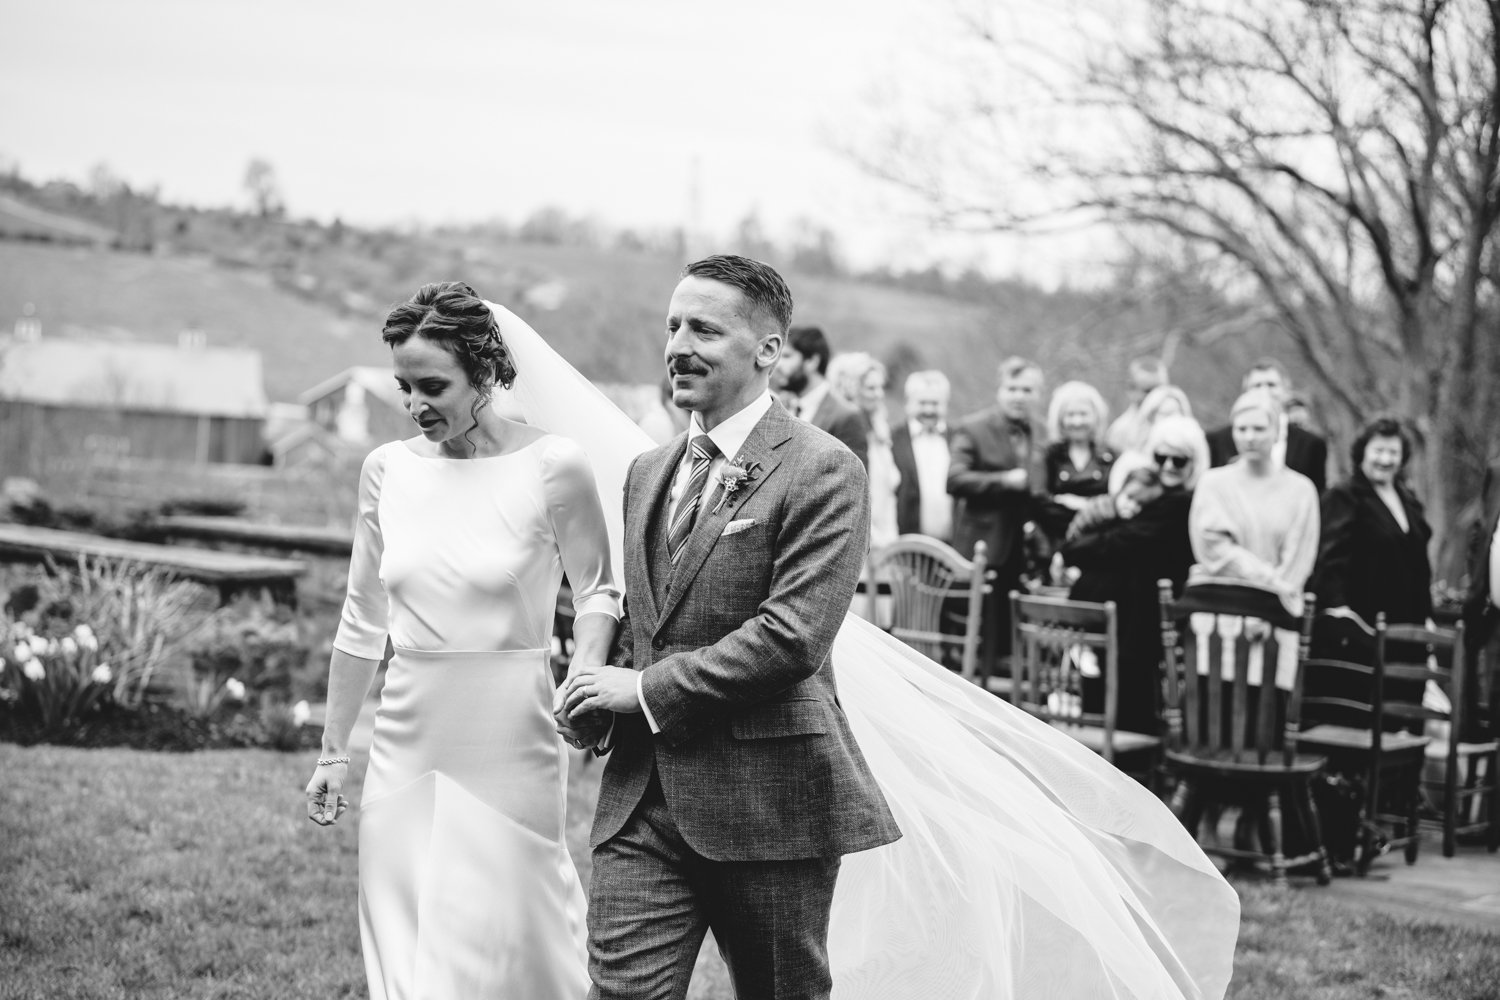 Bride and groom smile and holds hands as they process back down the aisle.

Upstate New York Wedding Photography. Cold Spring NY Wedding Photography. Luxury Local Wedding Photographer. Destination Wedding Photographer.